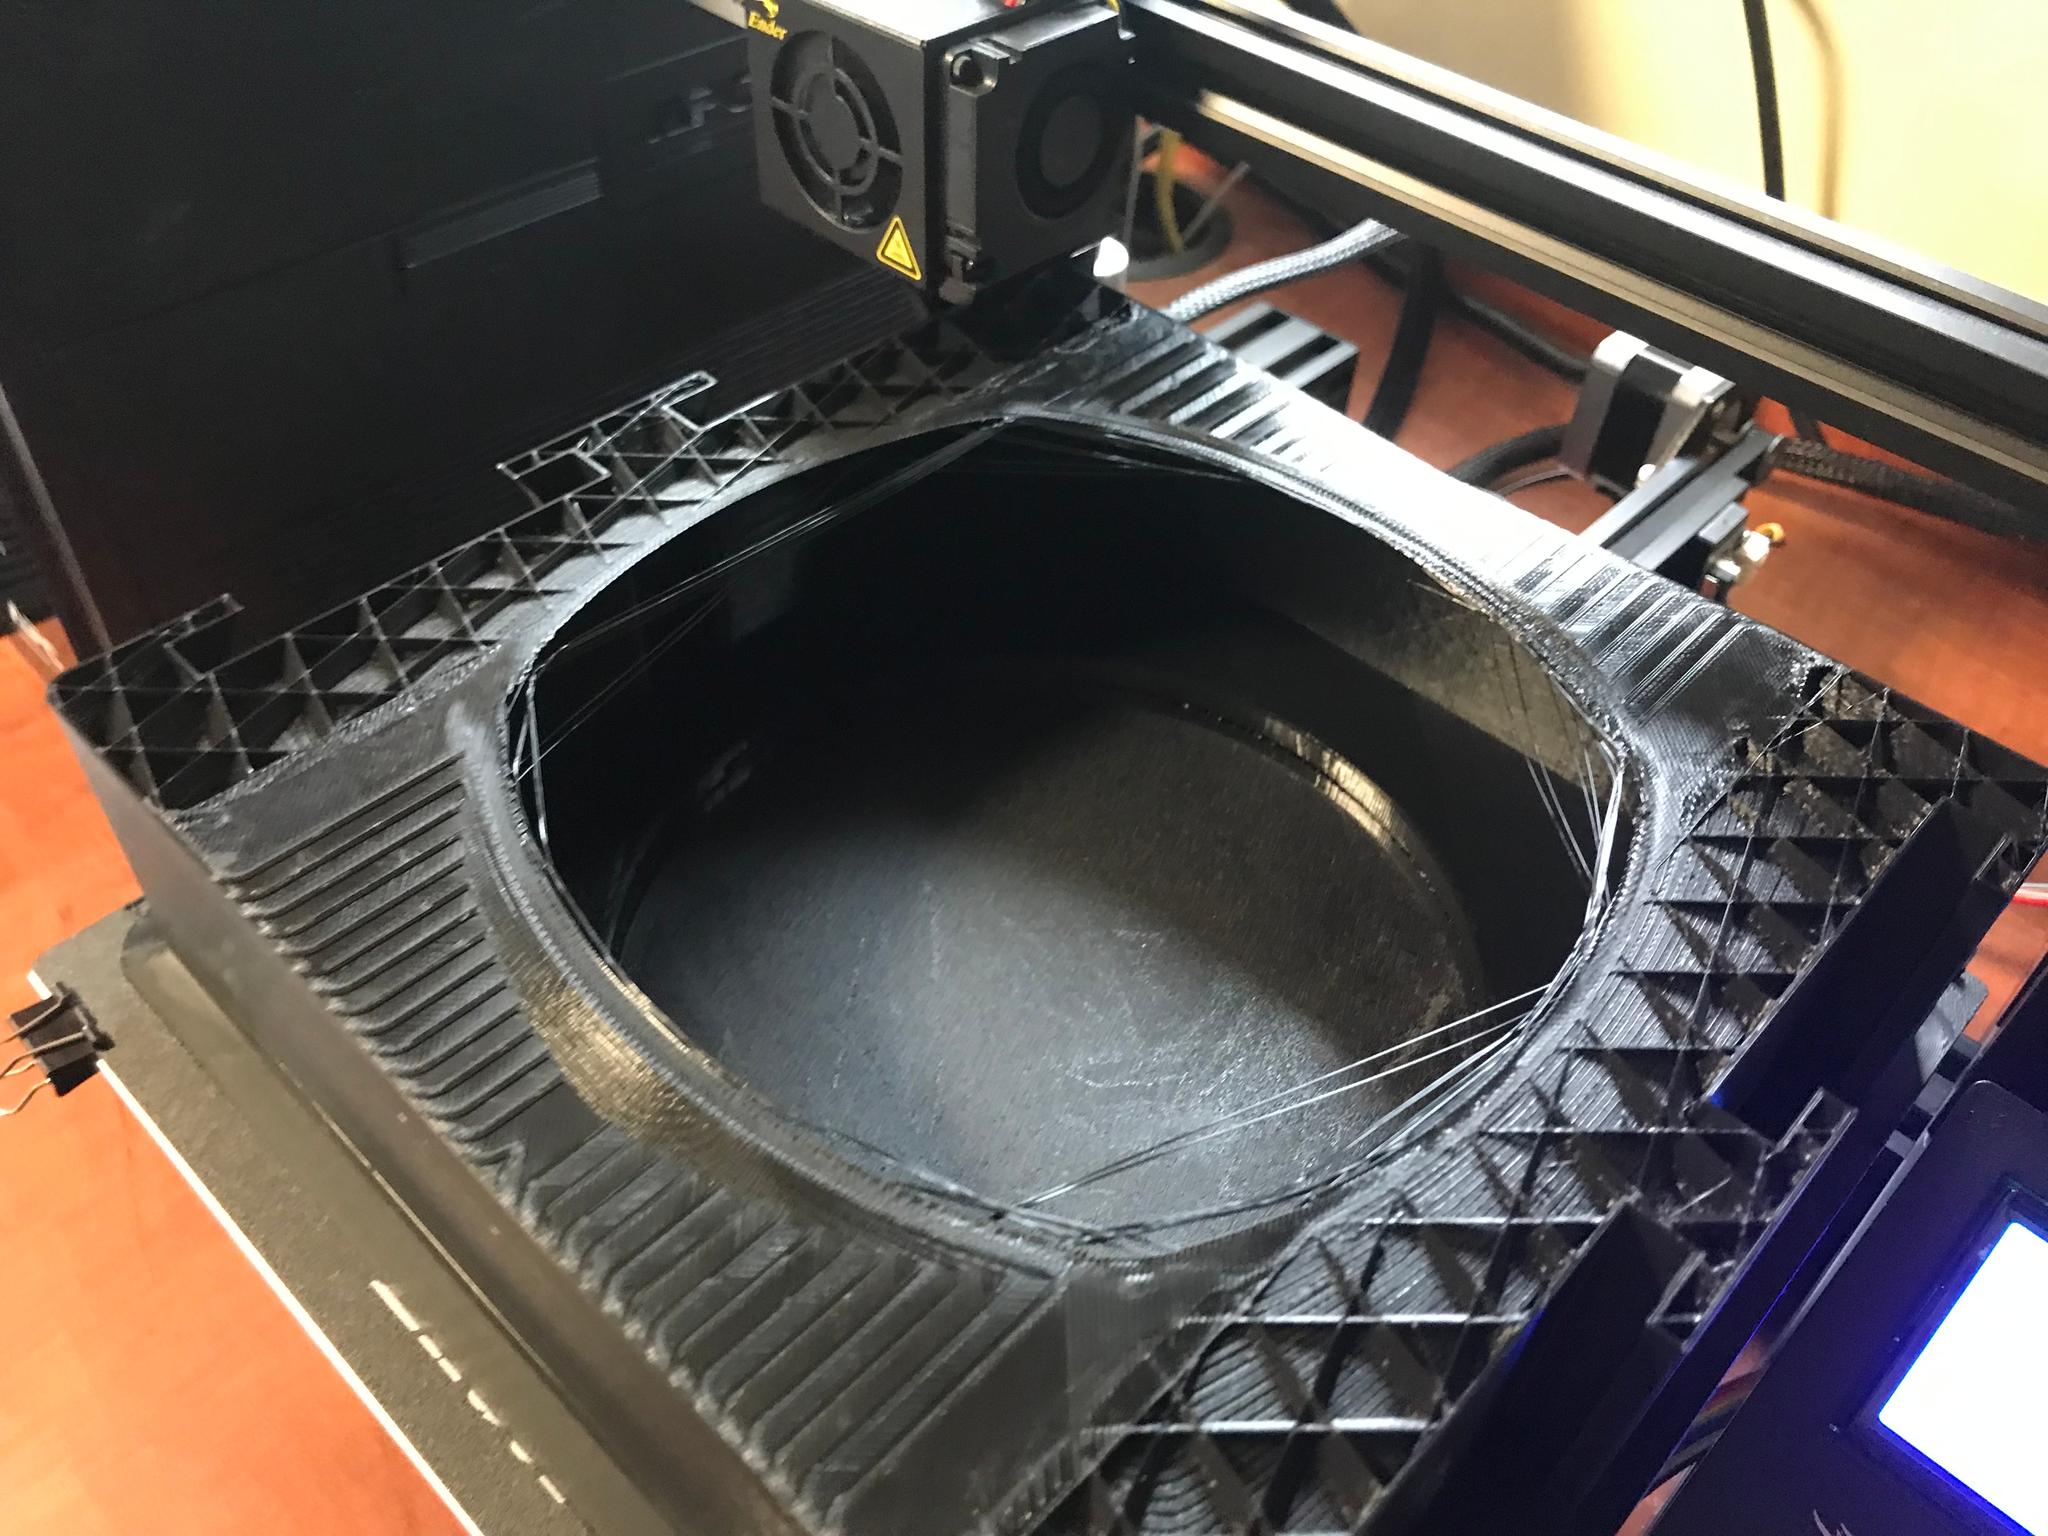 Printing defects during circular portion of funnel.